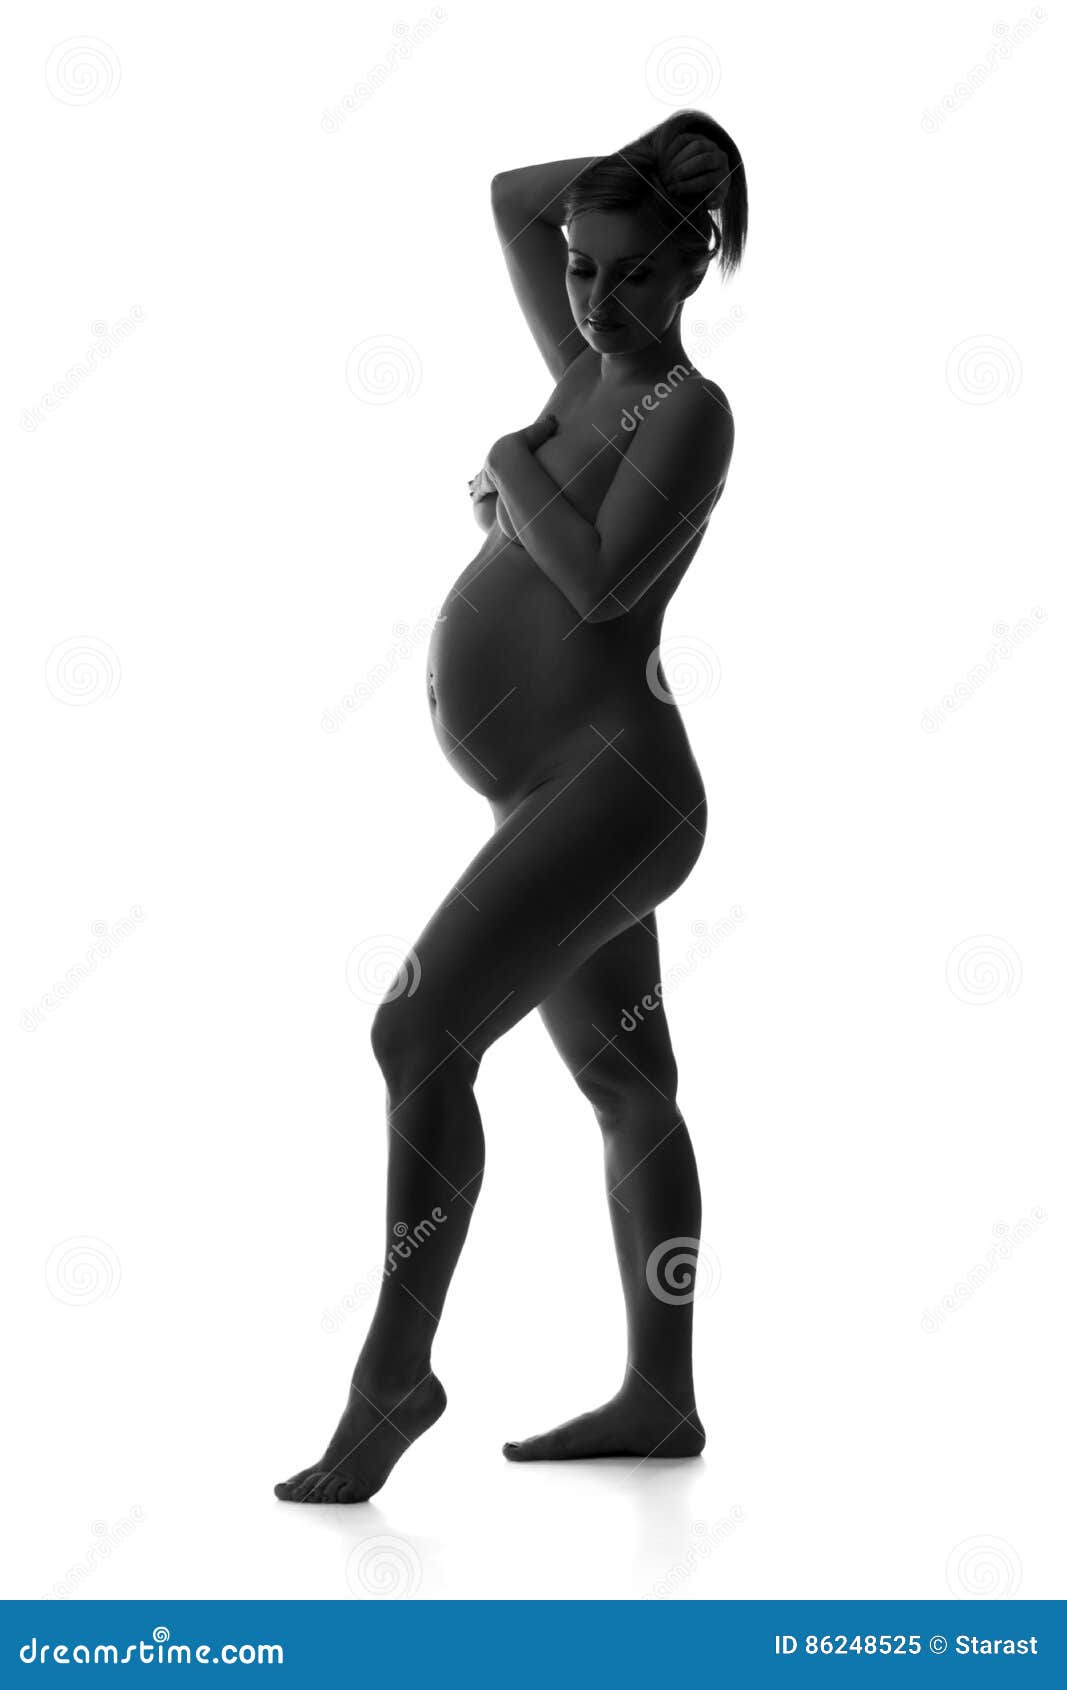 Black And White Nudes Pregnant - Beautiful Naked Pregnant Woman Isolated On White Background ...